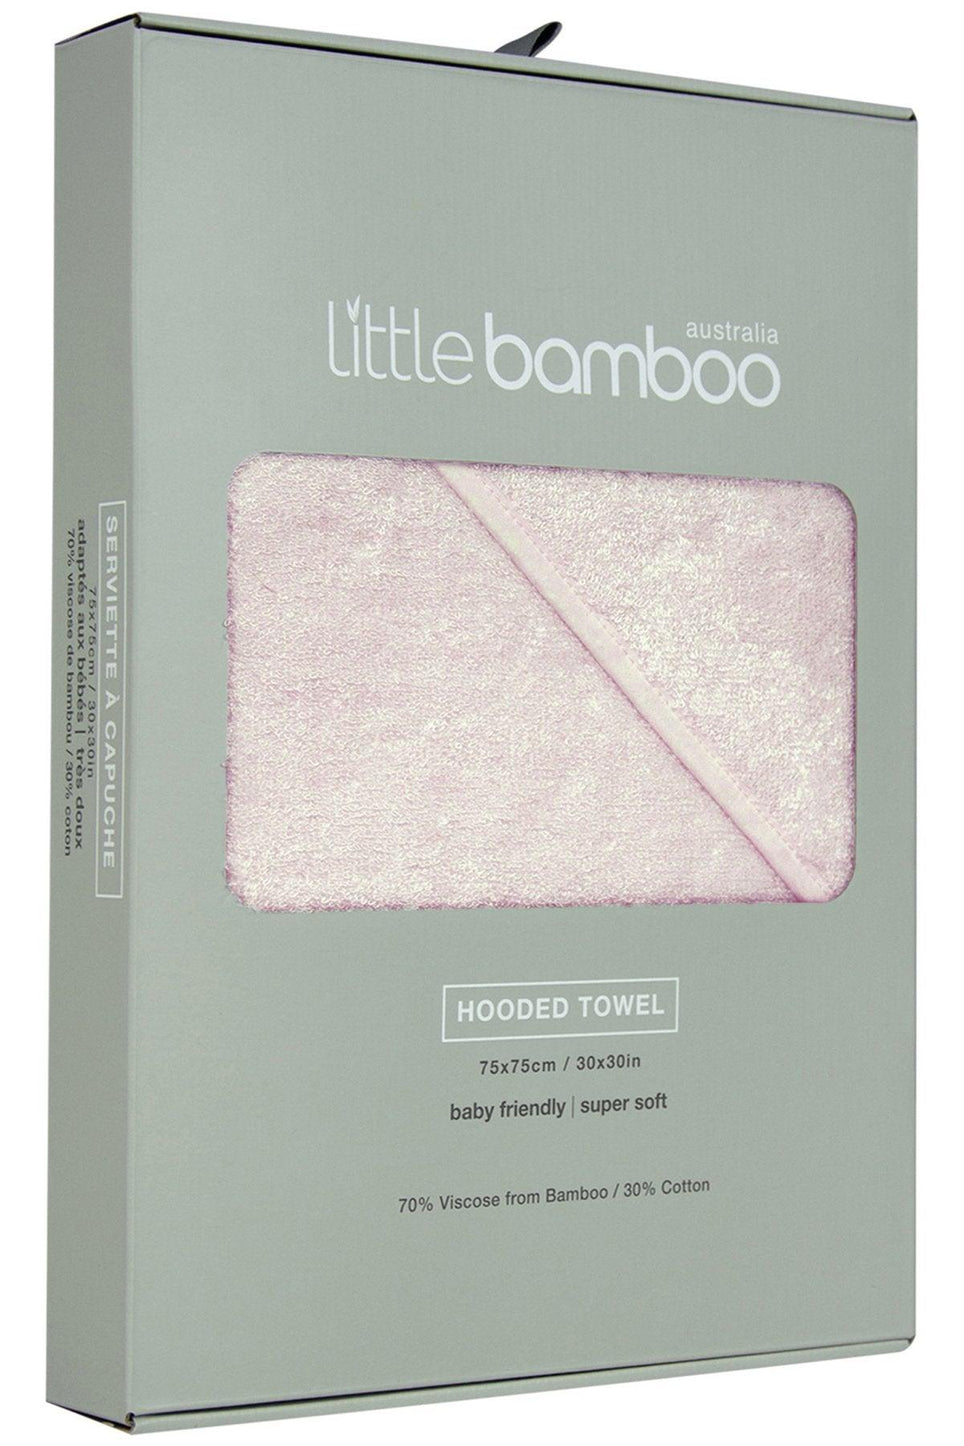 Little Bamboo Hooded Towel - Kiddie Country